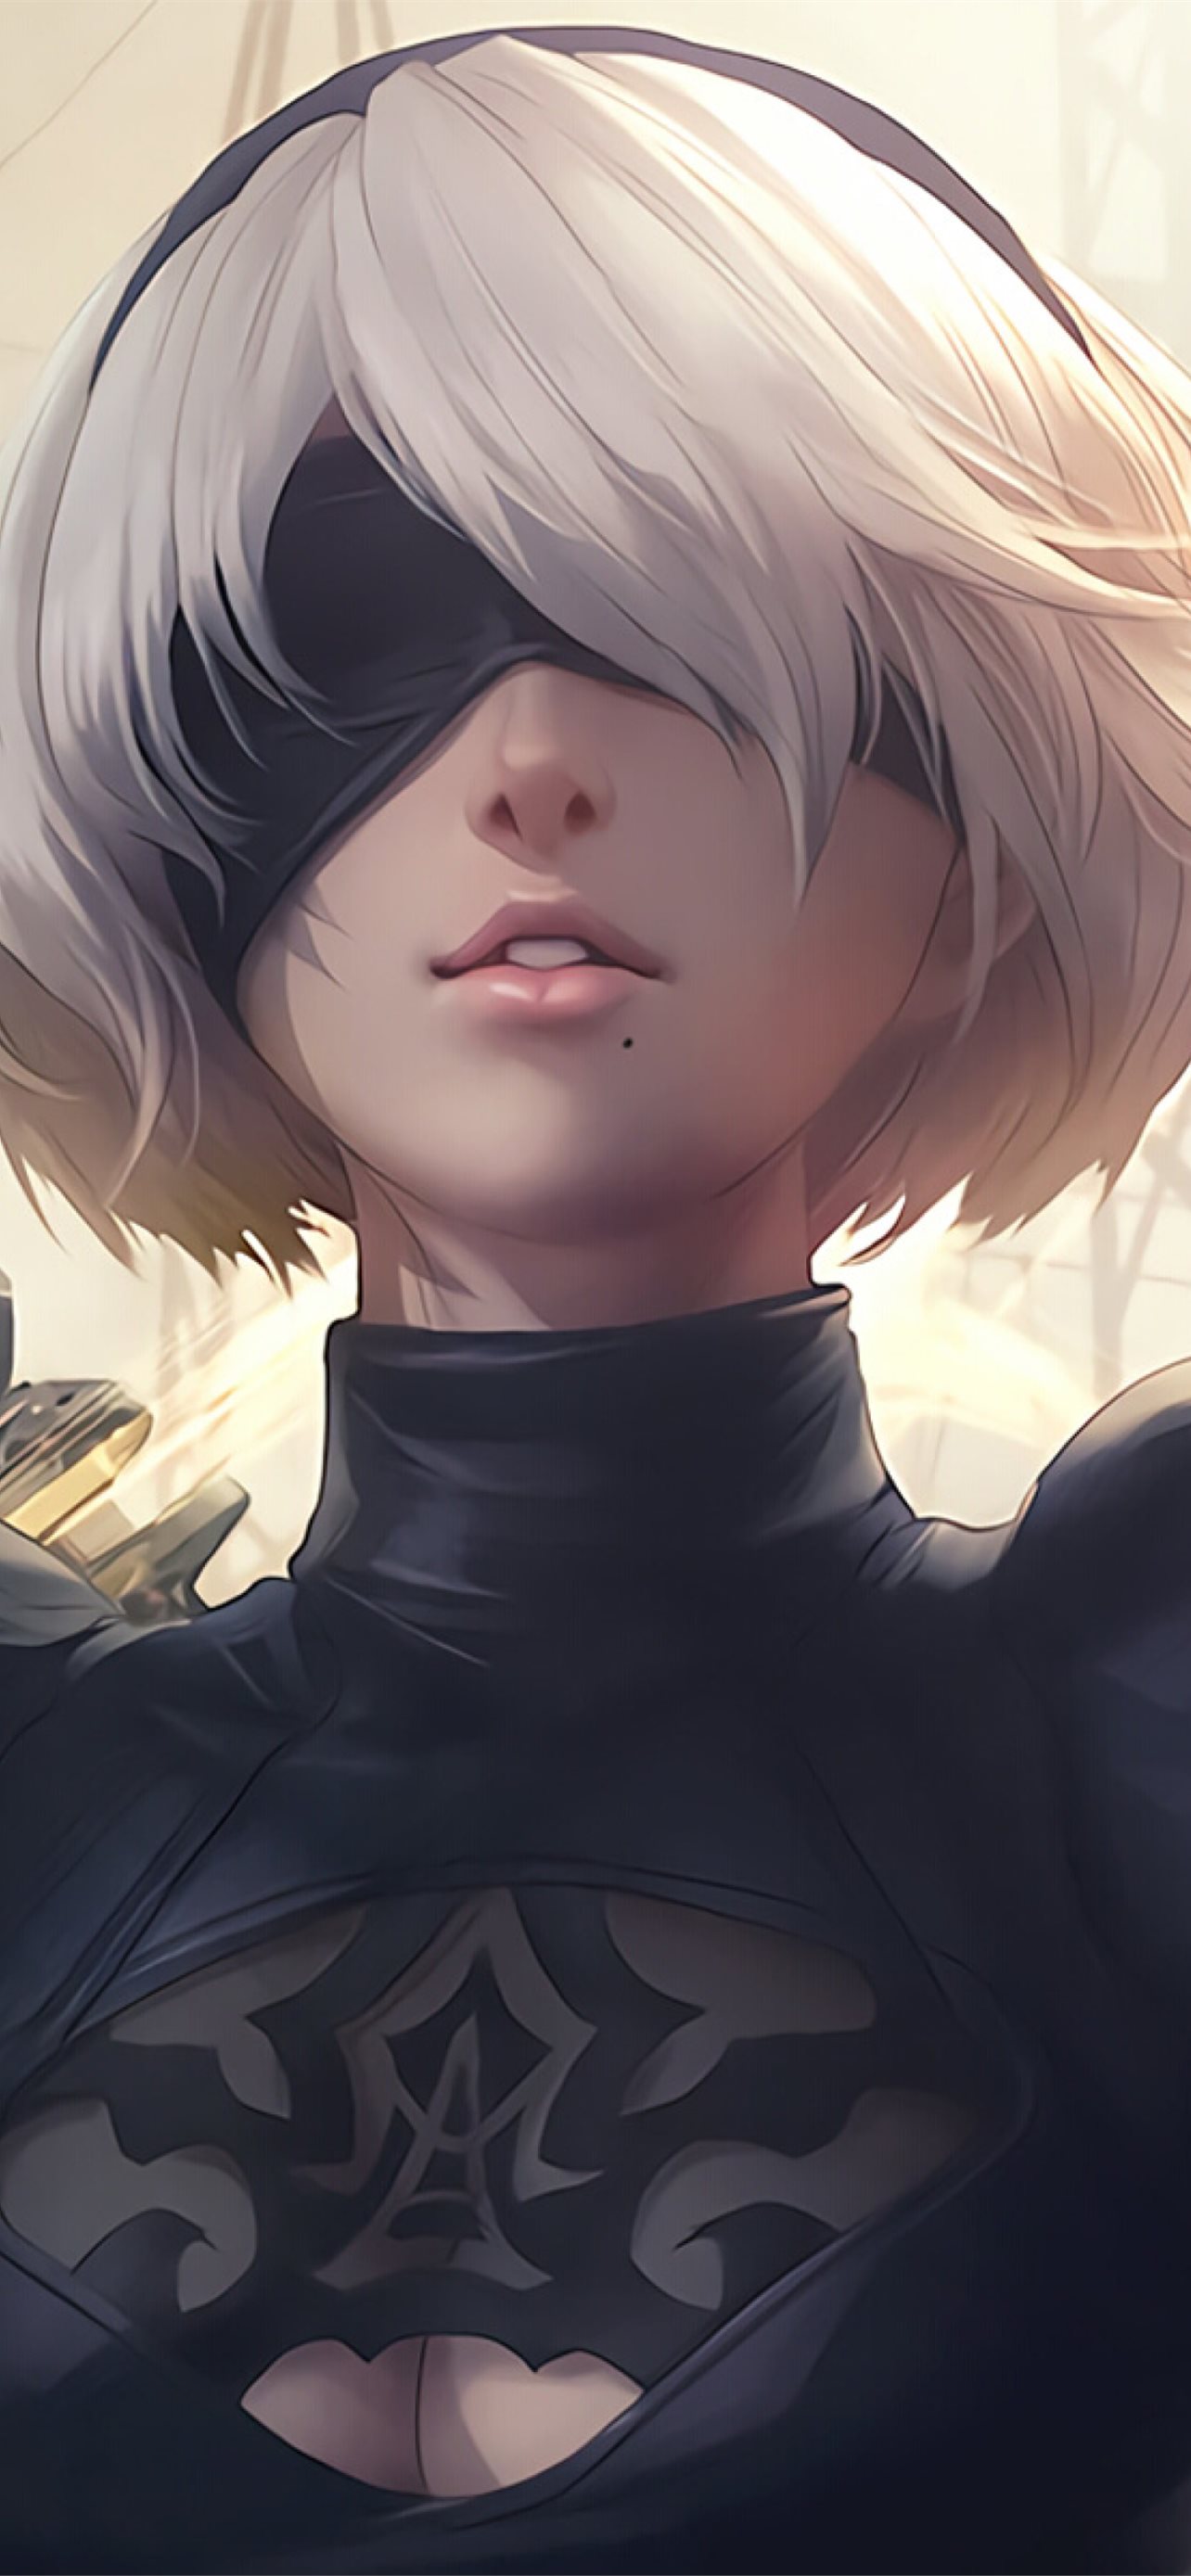 2B Nier Automata Resolution Hd Anime 4K Images Pho... Iphone Wallpapers  Free Download